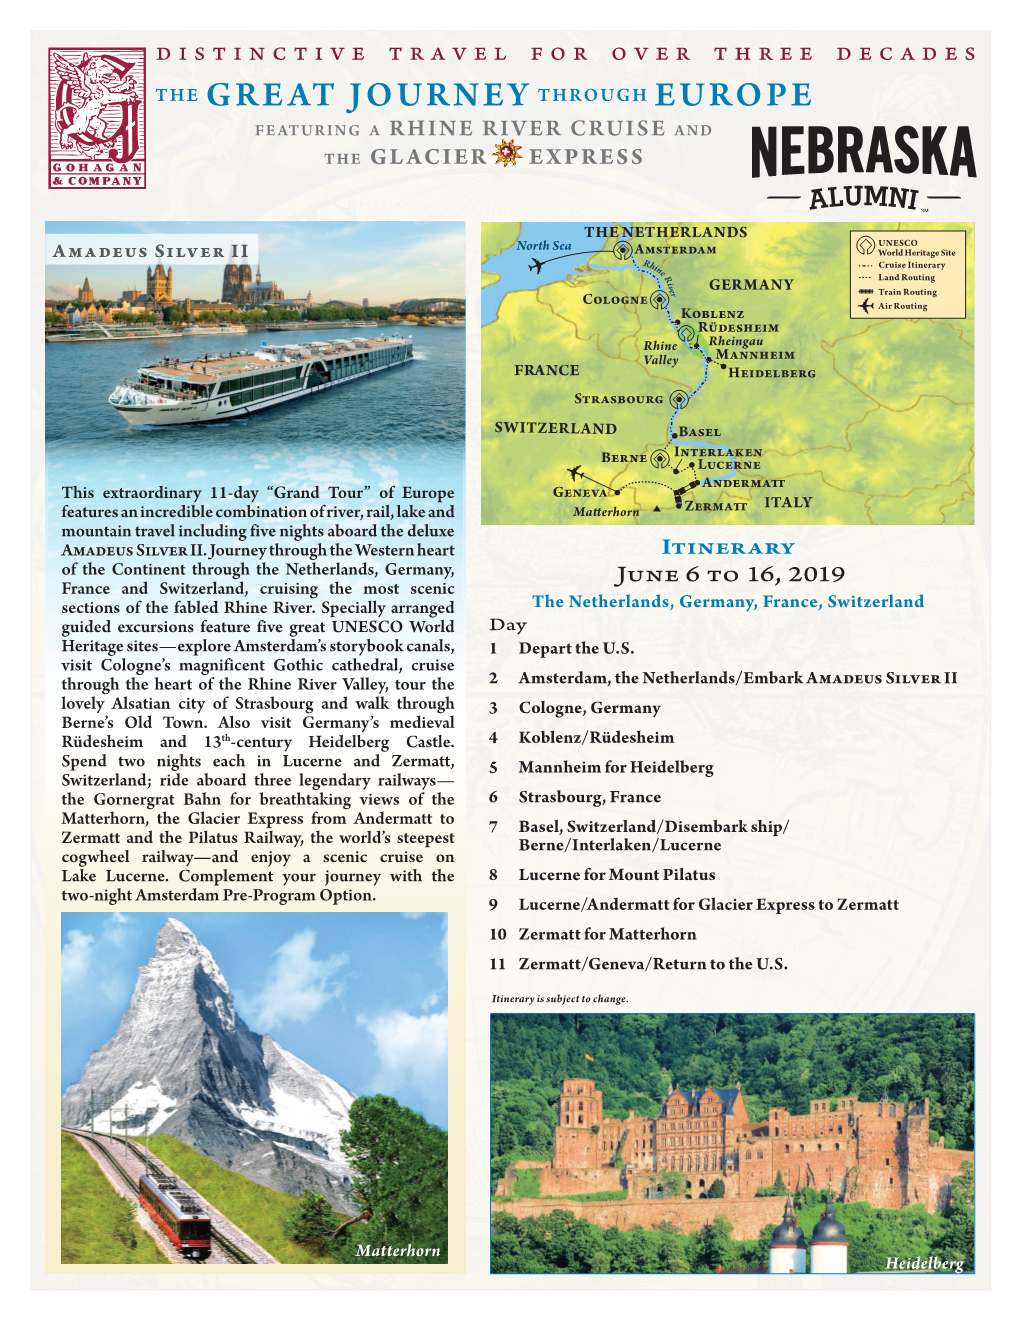 The Great Journey Through Europe Featuring a Rhine River Cruise and the Glacier Express